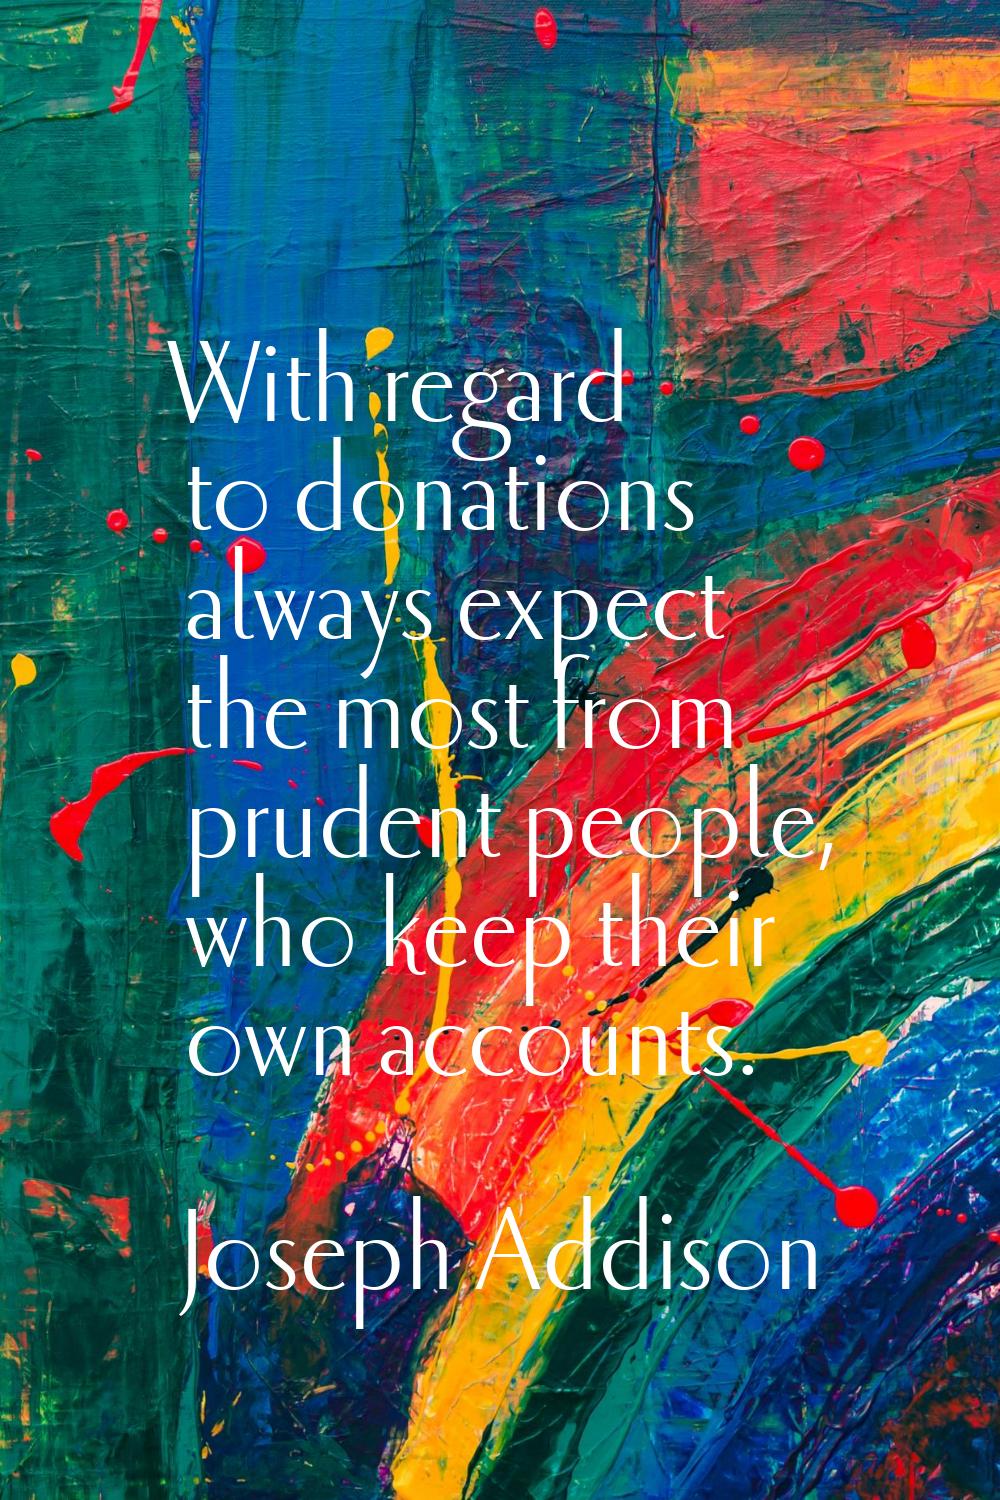 With regard to donations always expect the most from prudent people, who keep their own accounts.